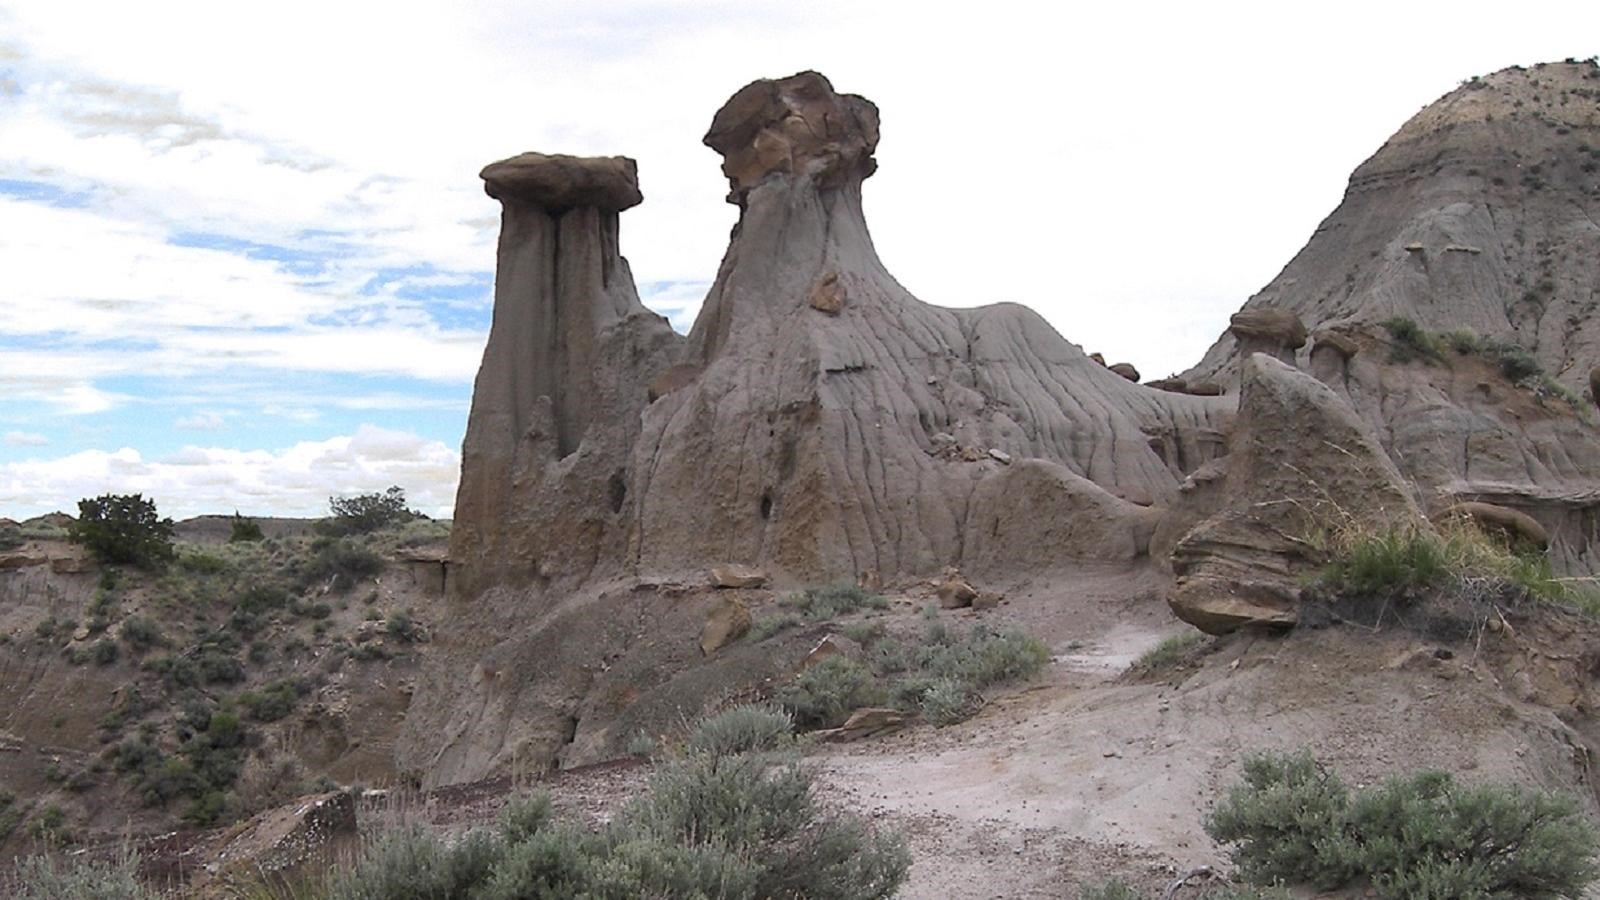 two large boulders perch atop sandstone pillars